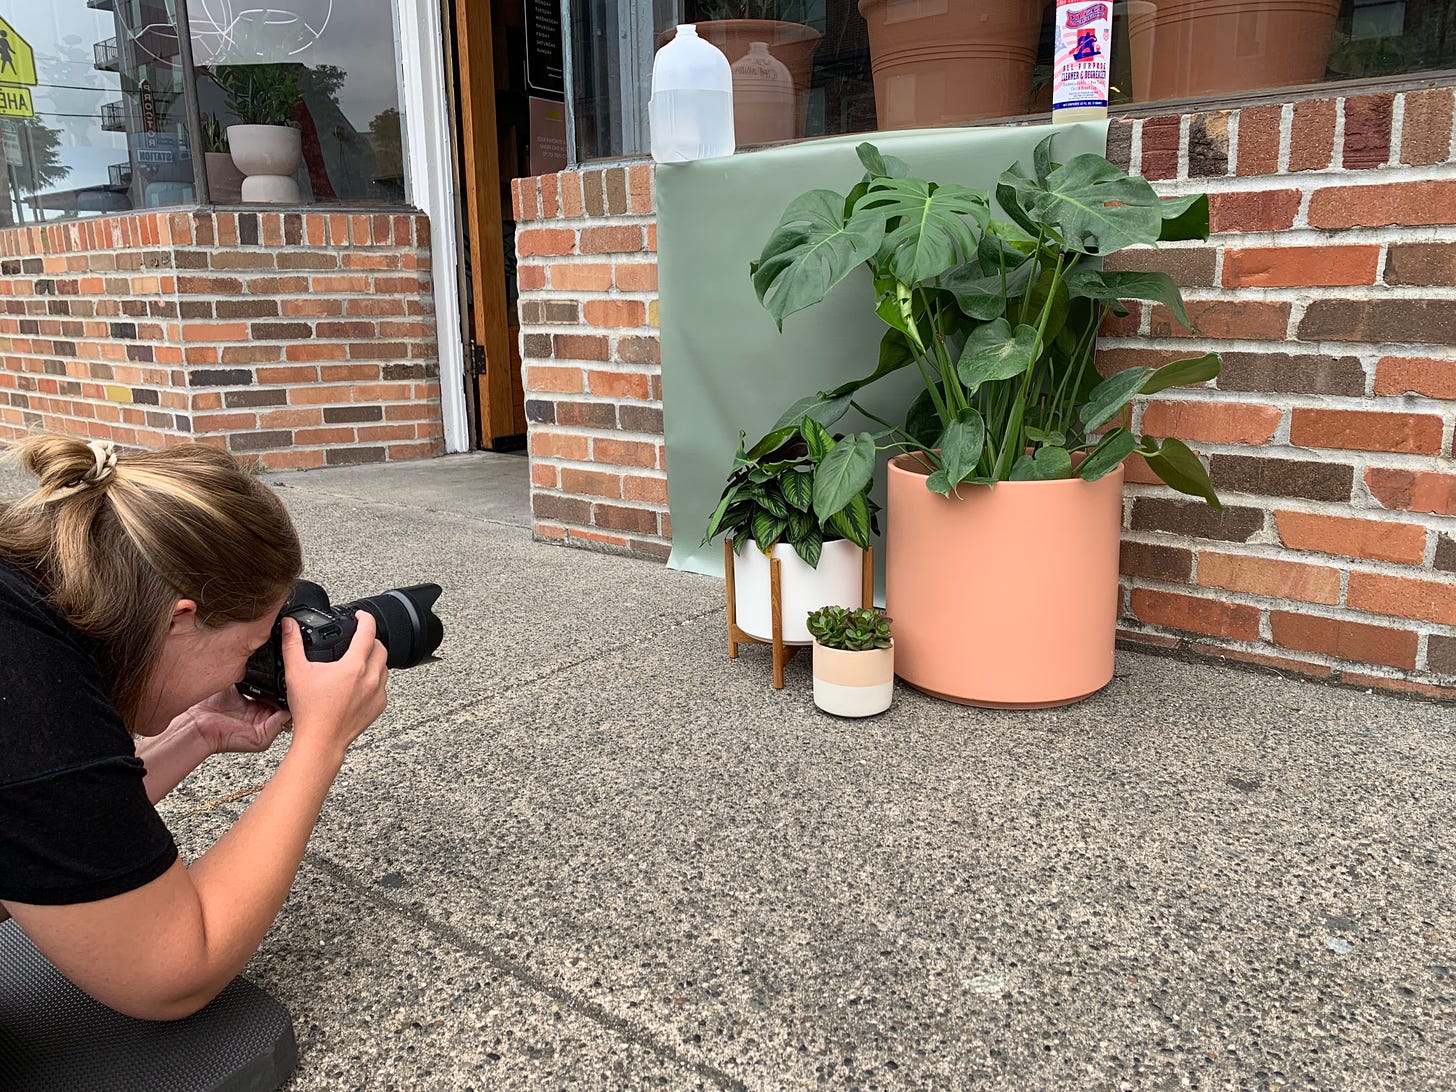 cluster of planters in a sidewalk outside a store with photographer crouched in front taking a photo